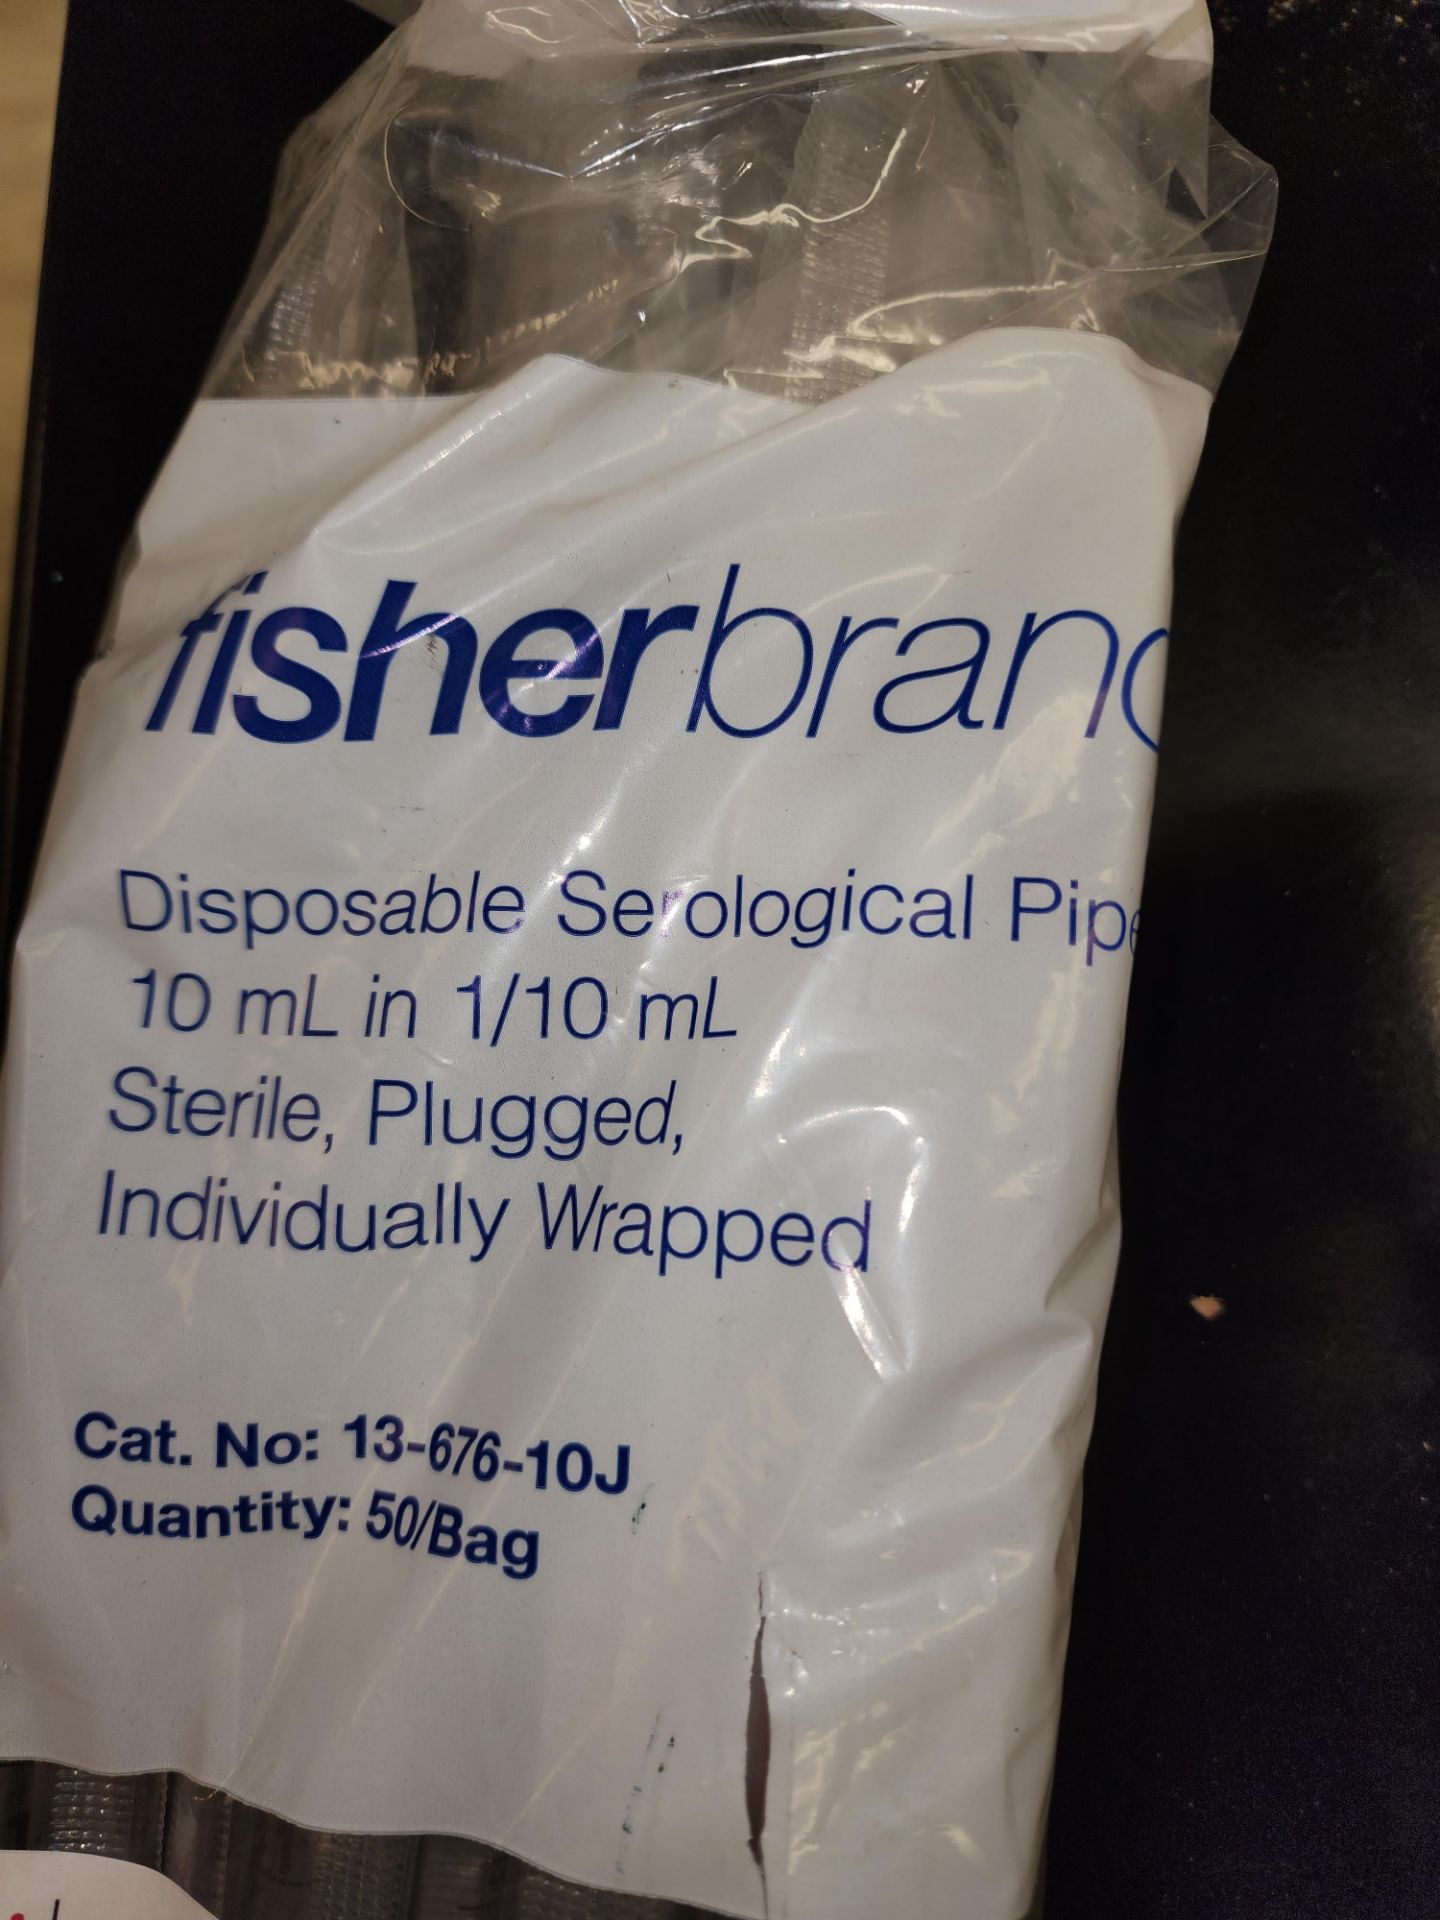 Fisherbrand Serological Pipettes - Image 3 of 3